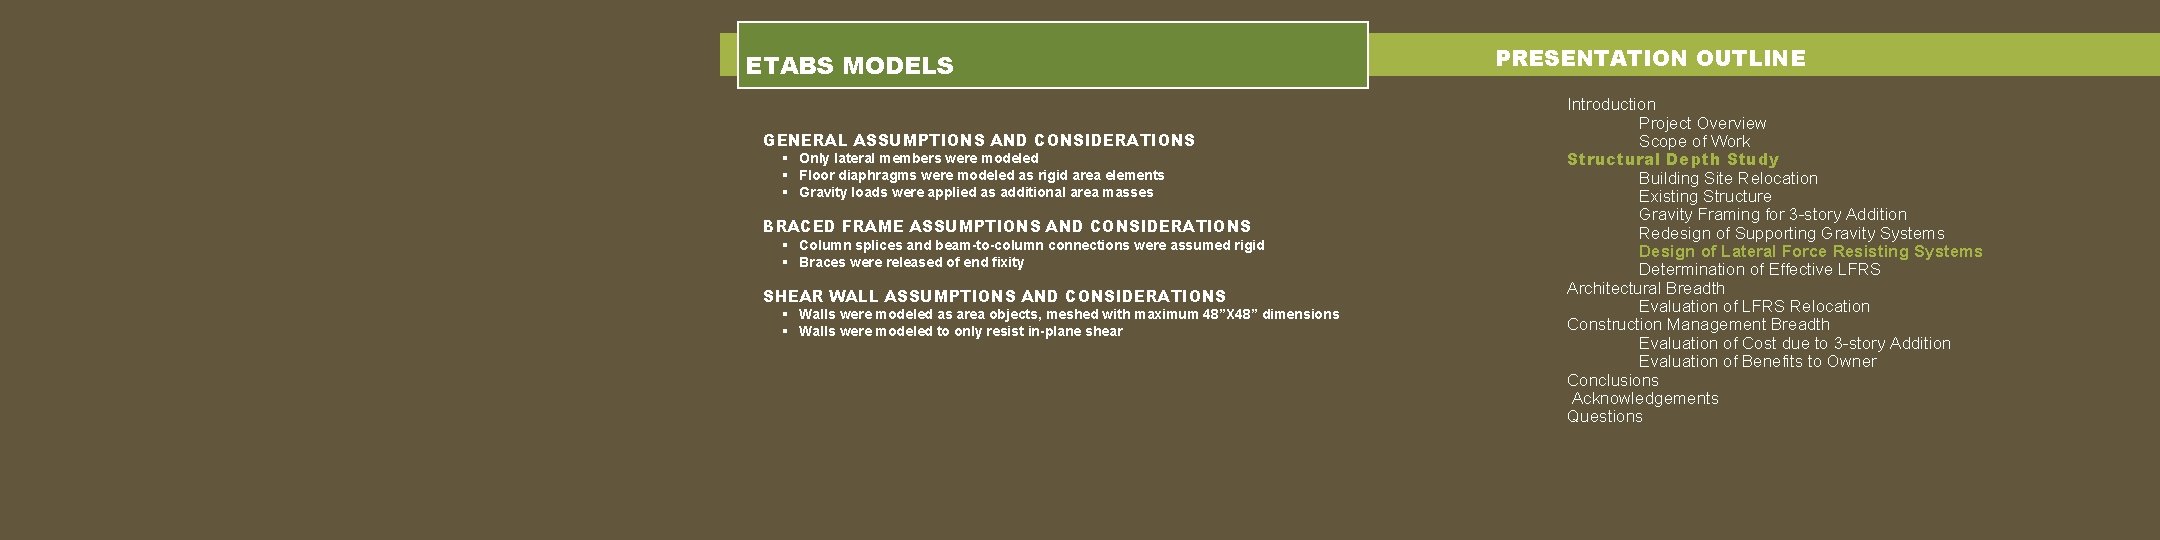 ETABS MODELS GENERAL ASSUMPTIONS AND CONSIDERATIONS § Only lateral members were modeled § Floor